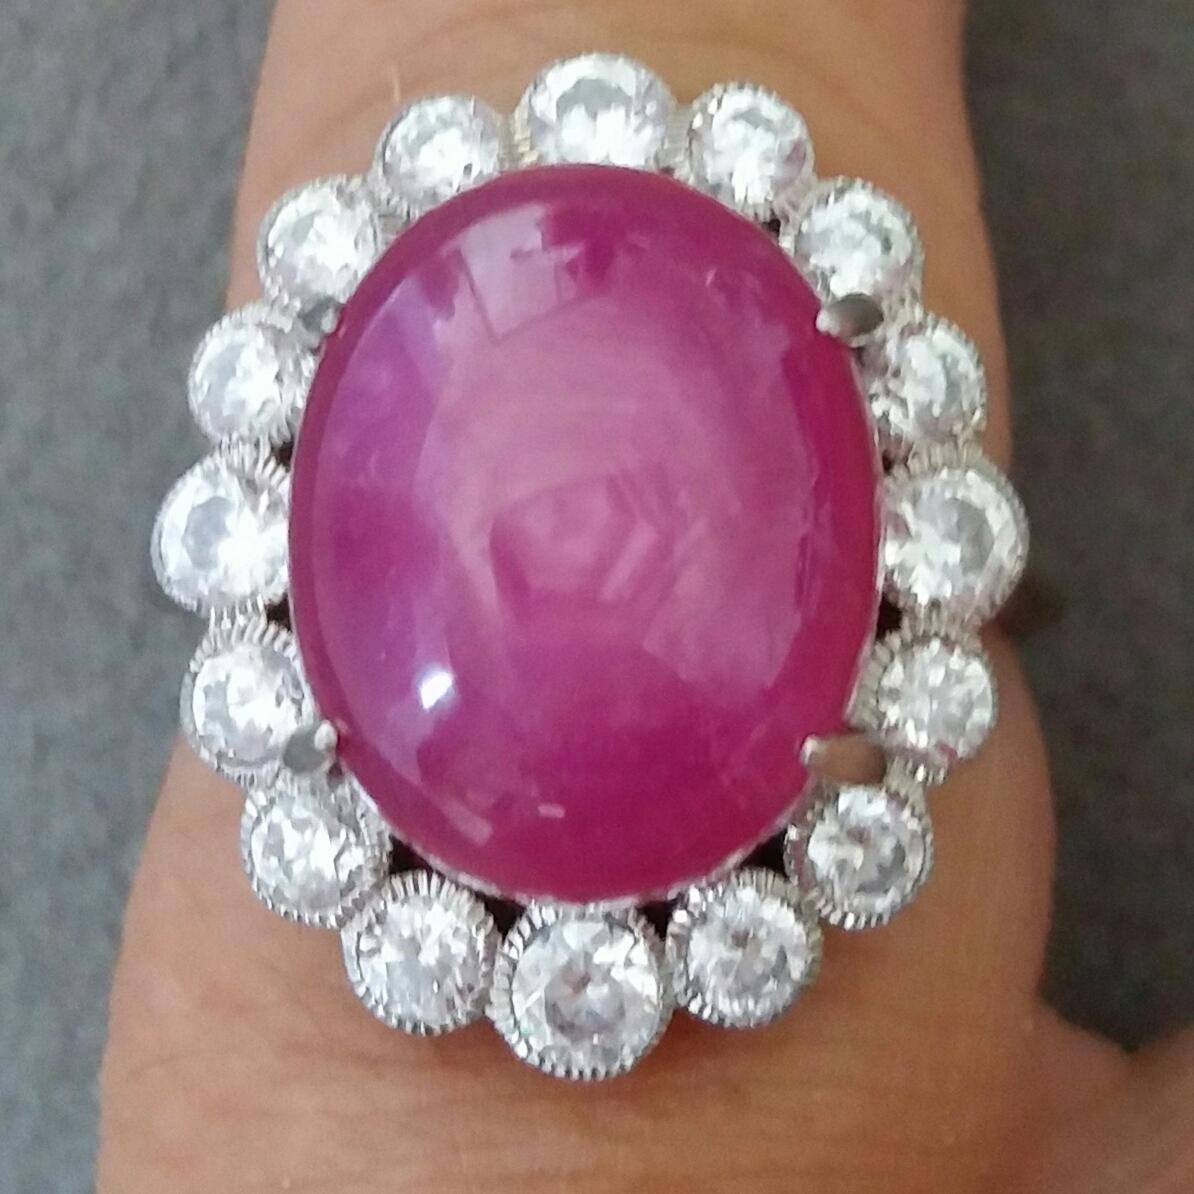 !8 carat burgundy color oval Ruby  cabochon ( 15 mm x 12 mm) set with 4,5 grams of 14 kt.white gold, 16 round full cut diamonds of 0,05 ct each = 0,8 ct total diamond weight

Ring Shank Diameter 21 mm
Height  28 mm
Weight  8 grams
In 1978 our